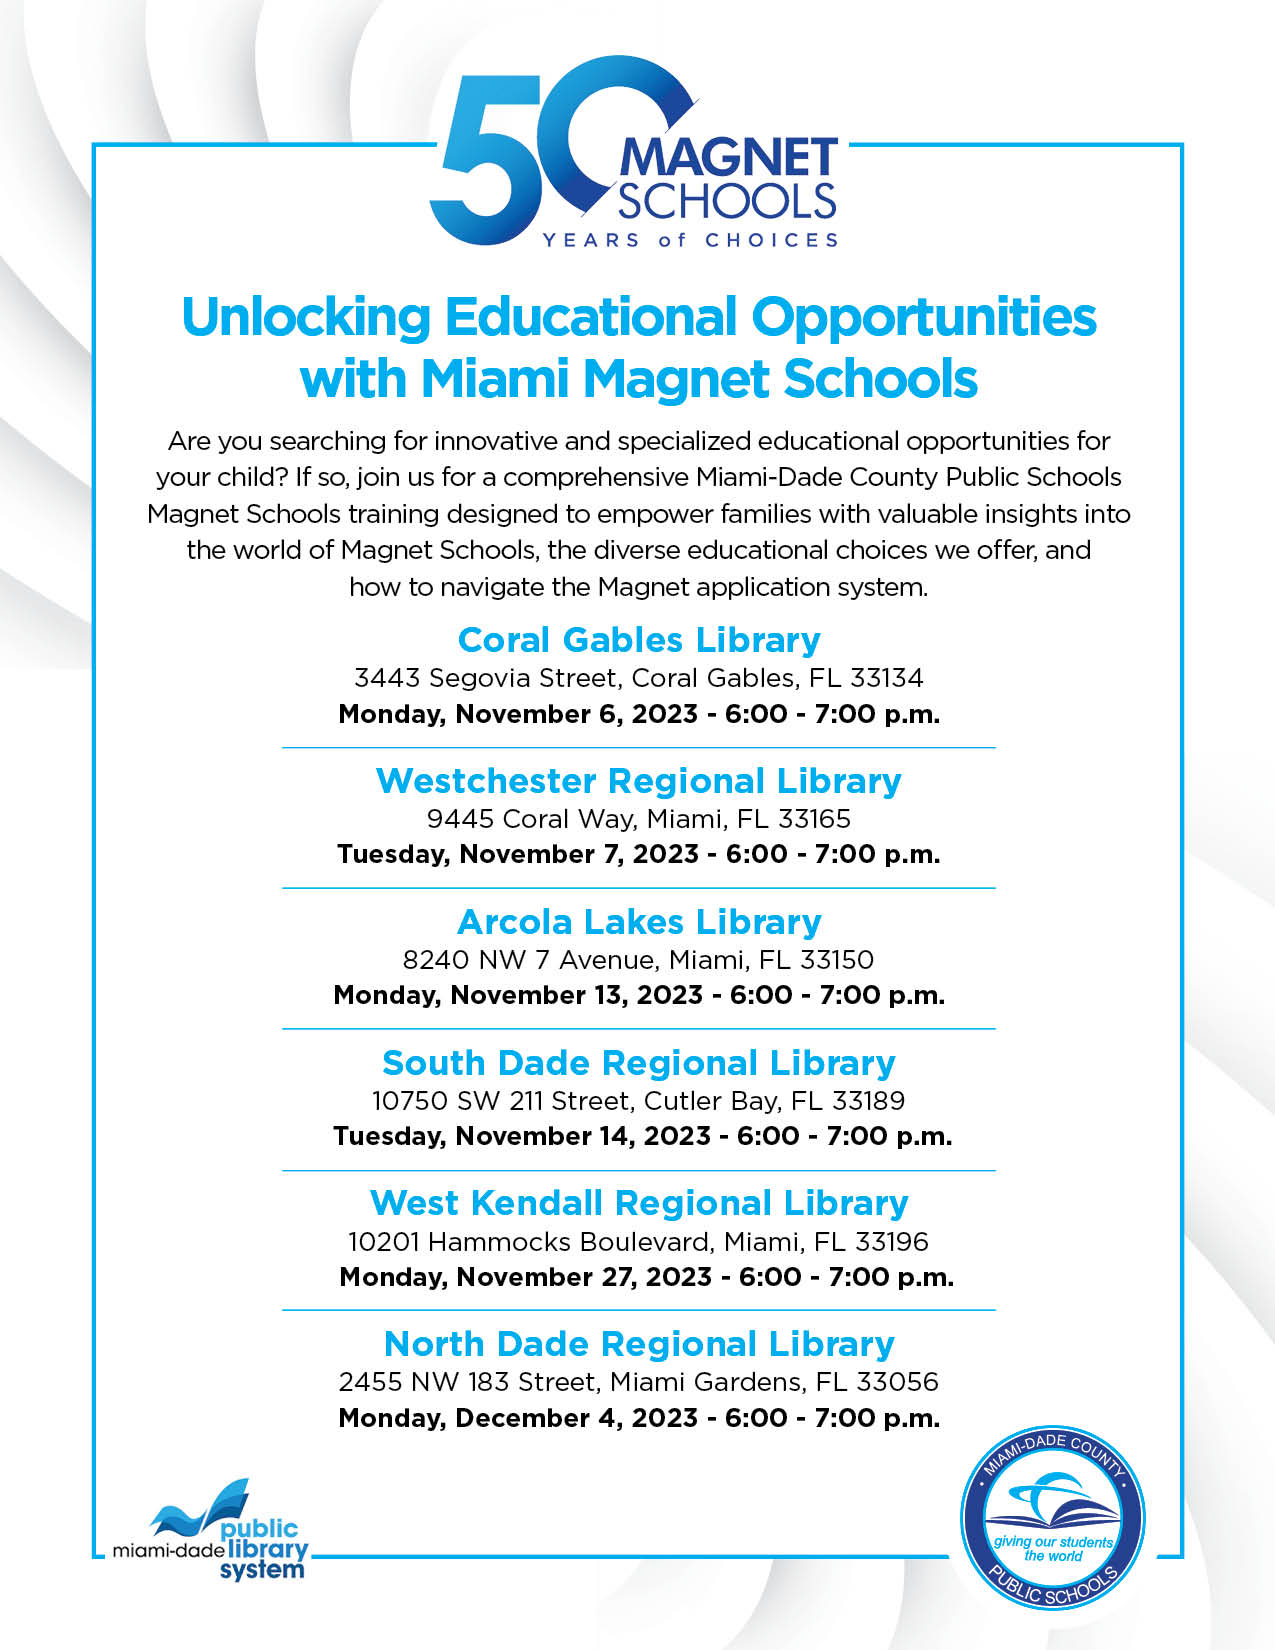 Unlocking Educational Opportunities with Miami Magnet Schools (see flyer for locations)